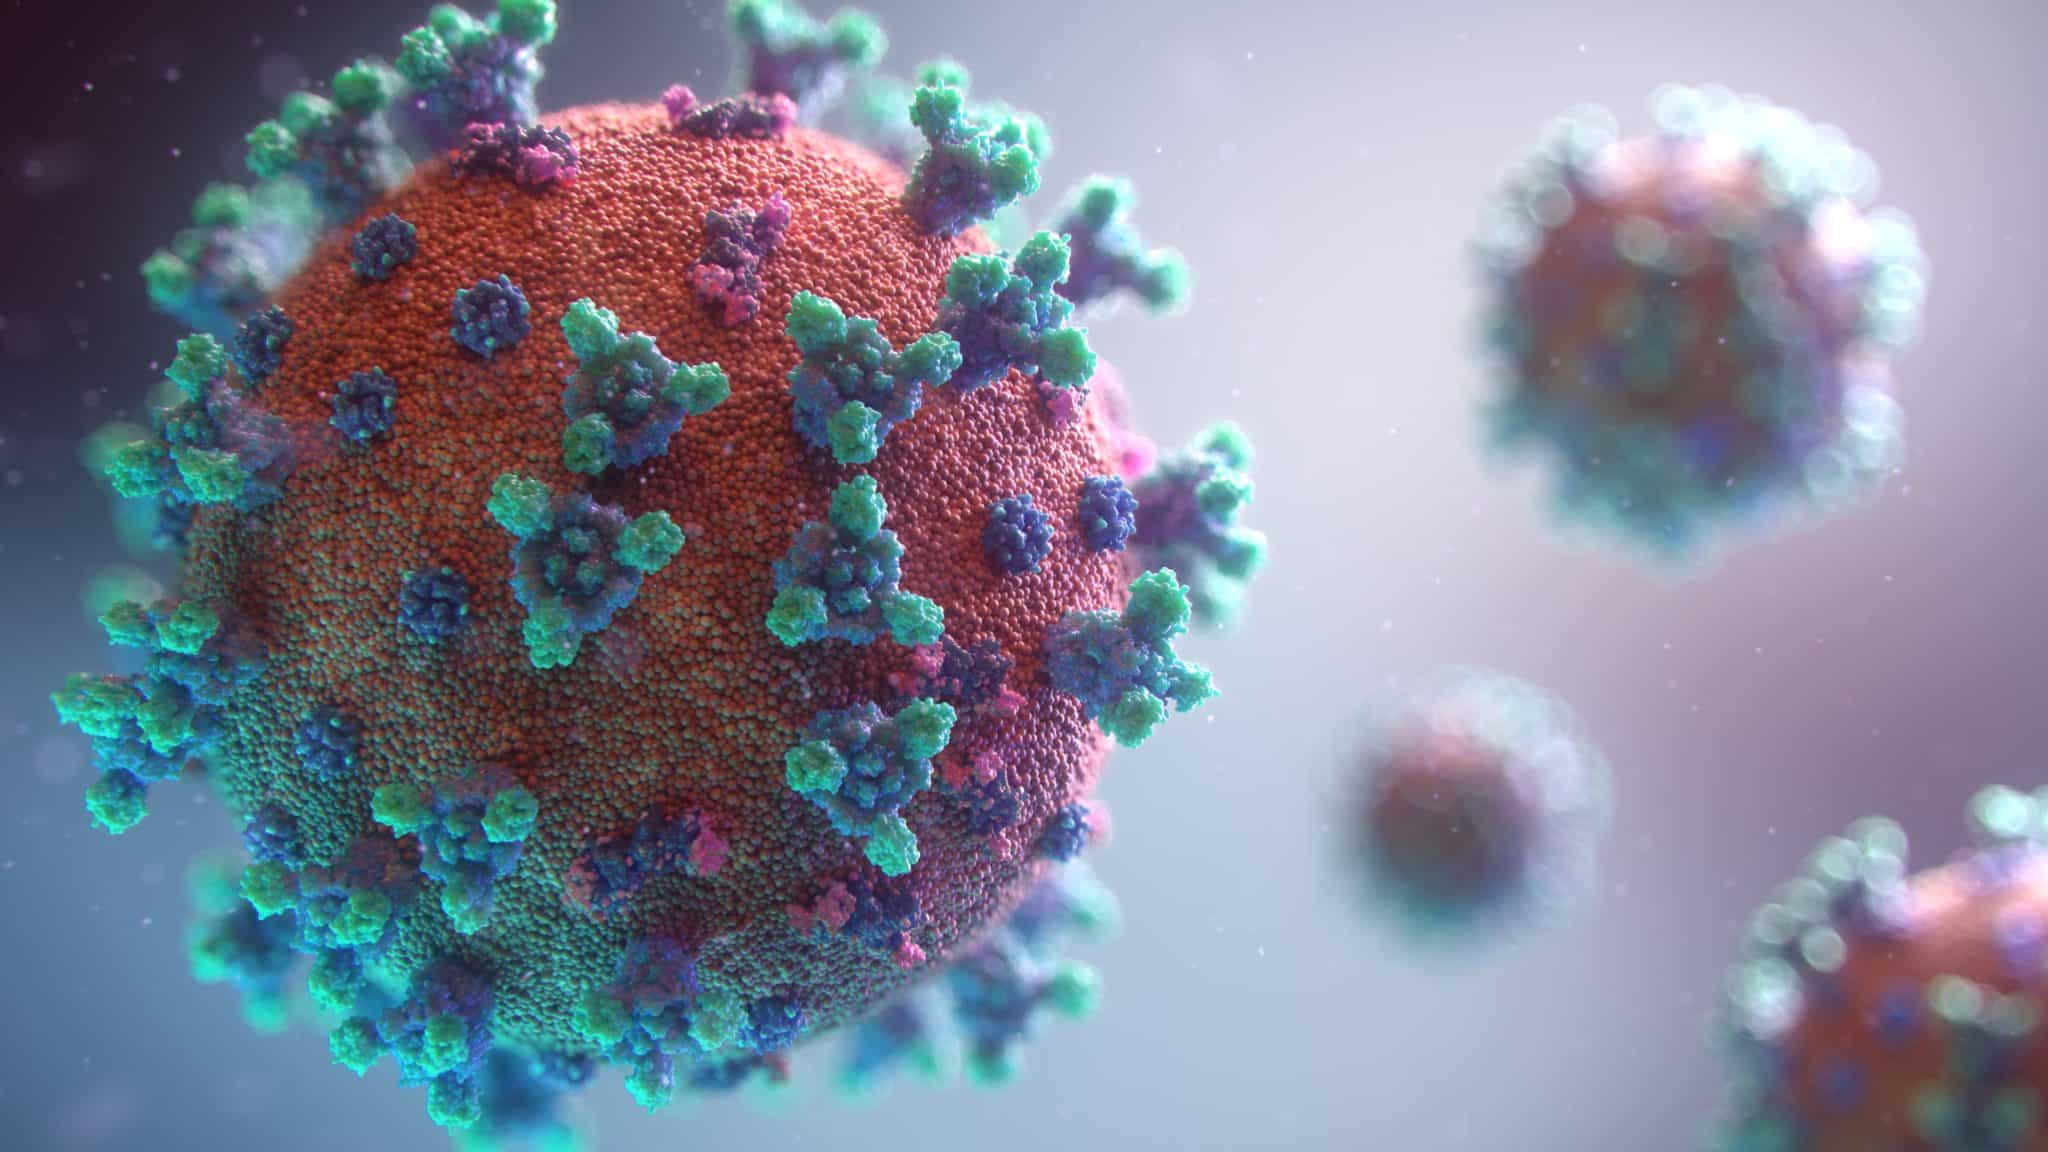 Image of a coronavirus and its spikes